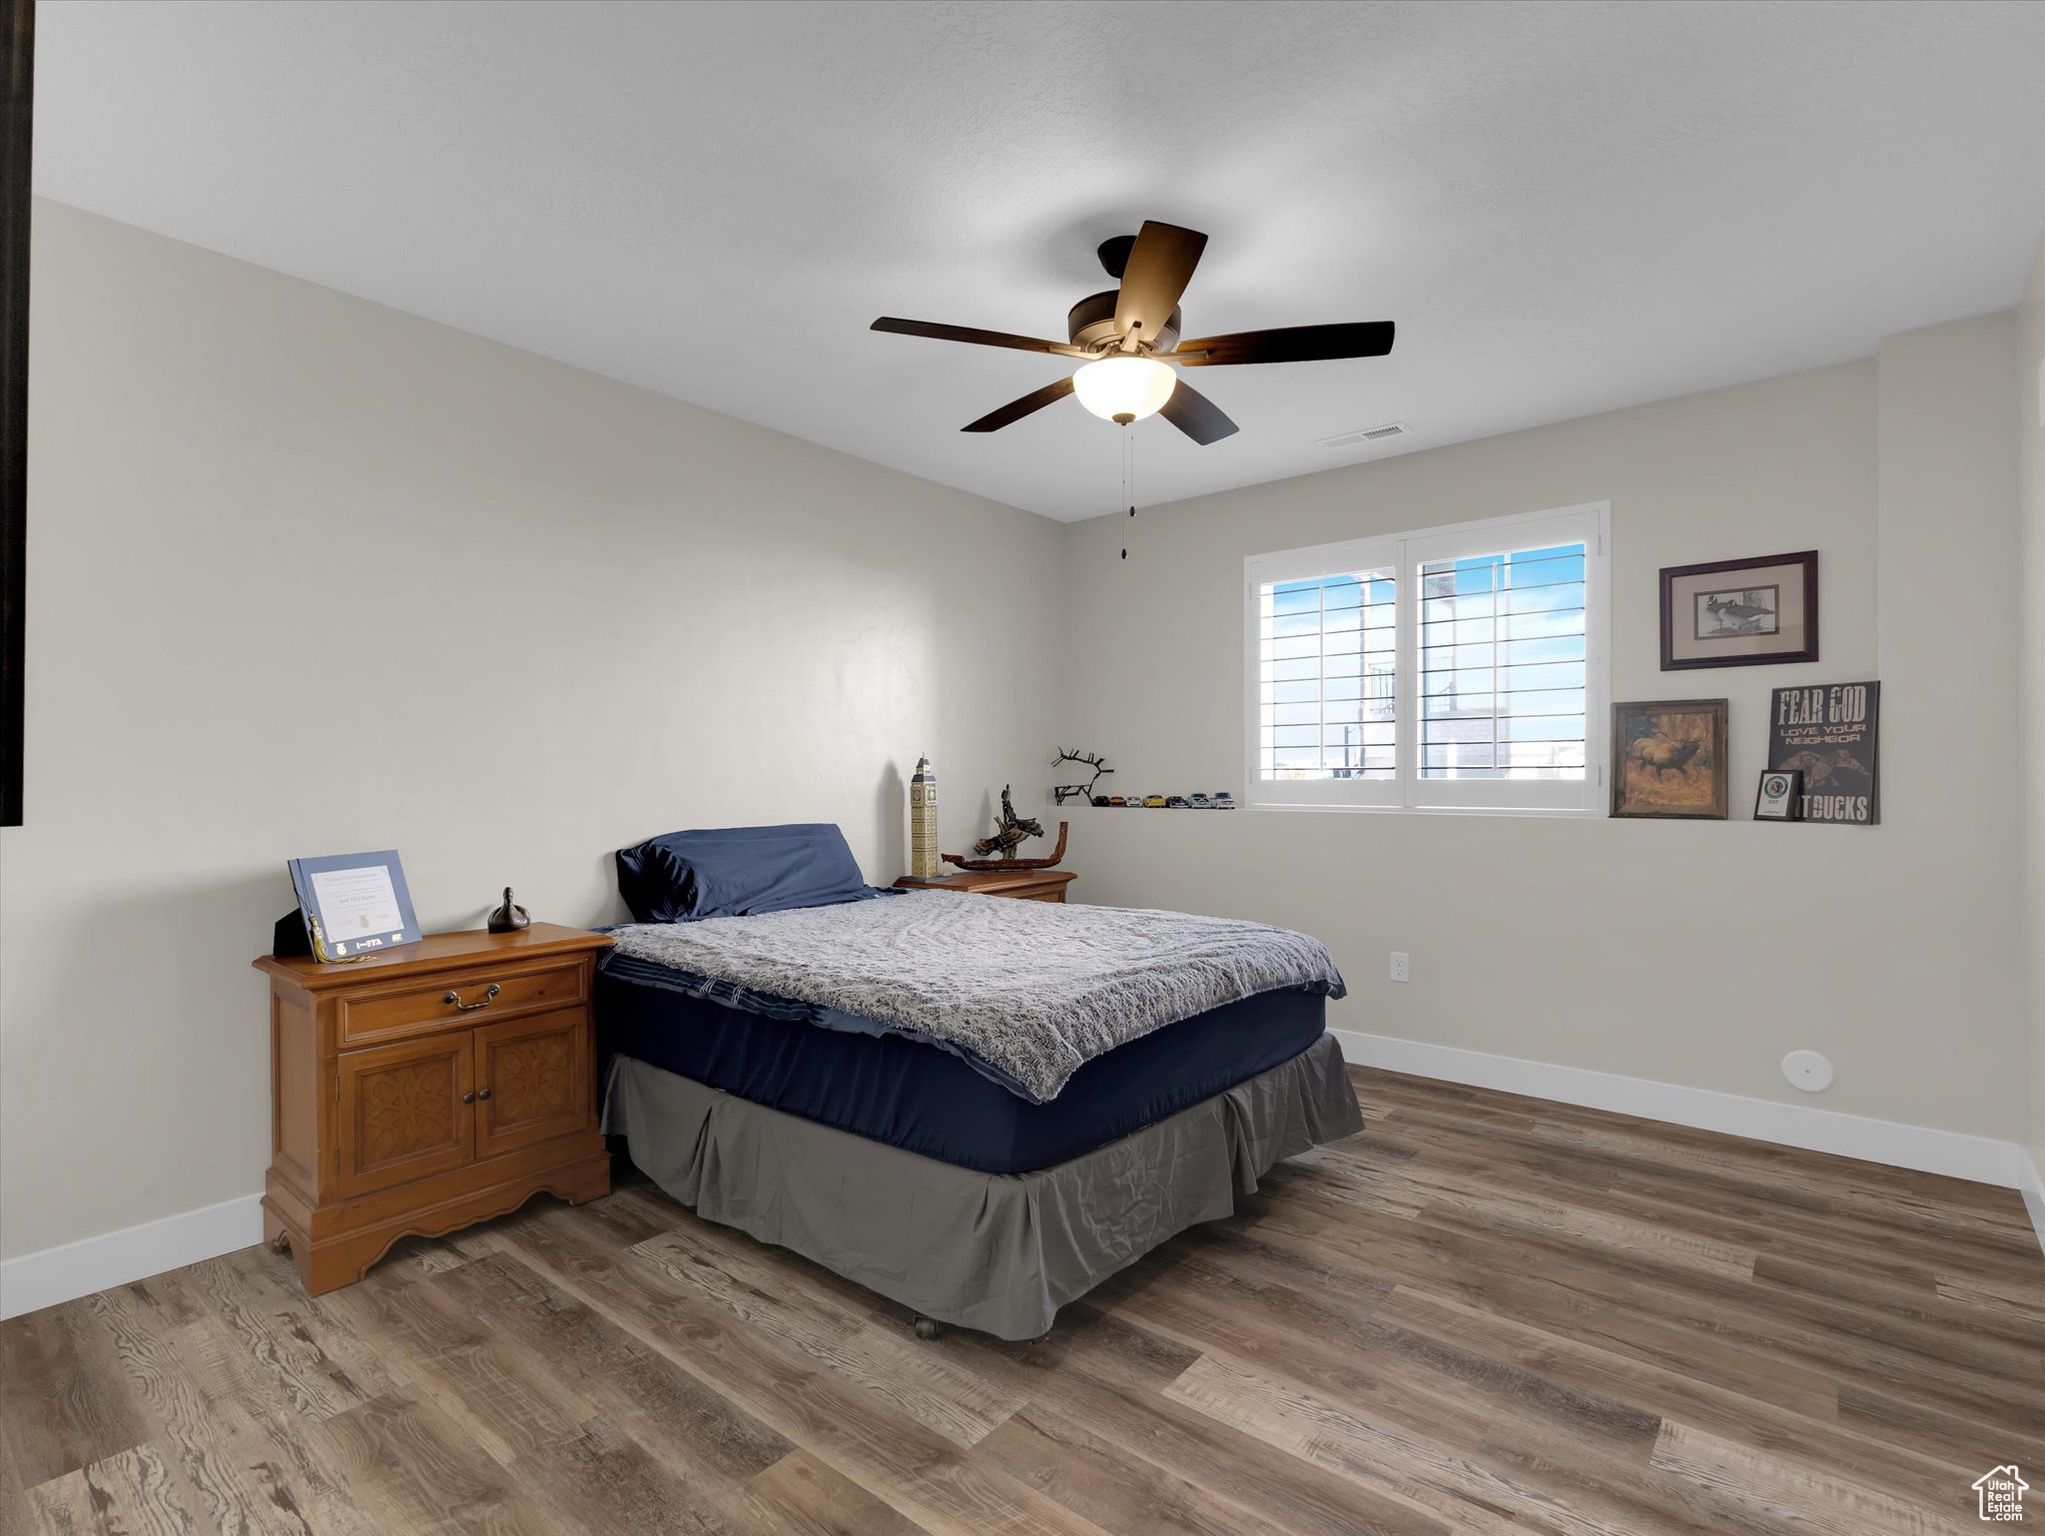 Bedroom #4 with ceiling fan and hardwood / wood-style flooring